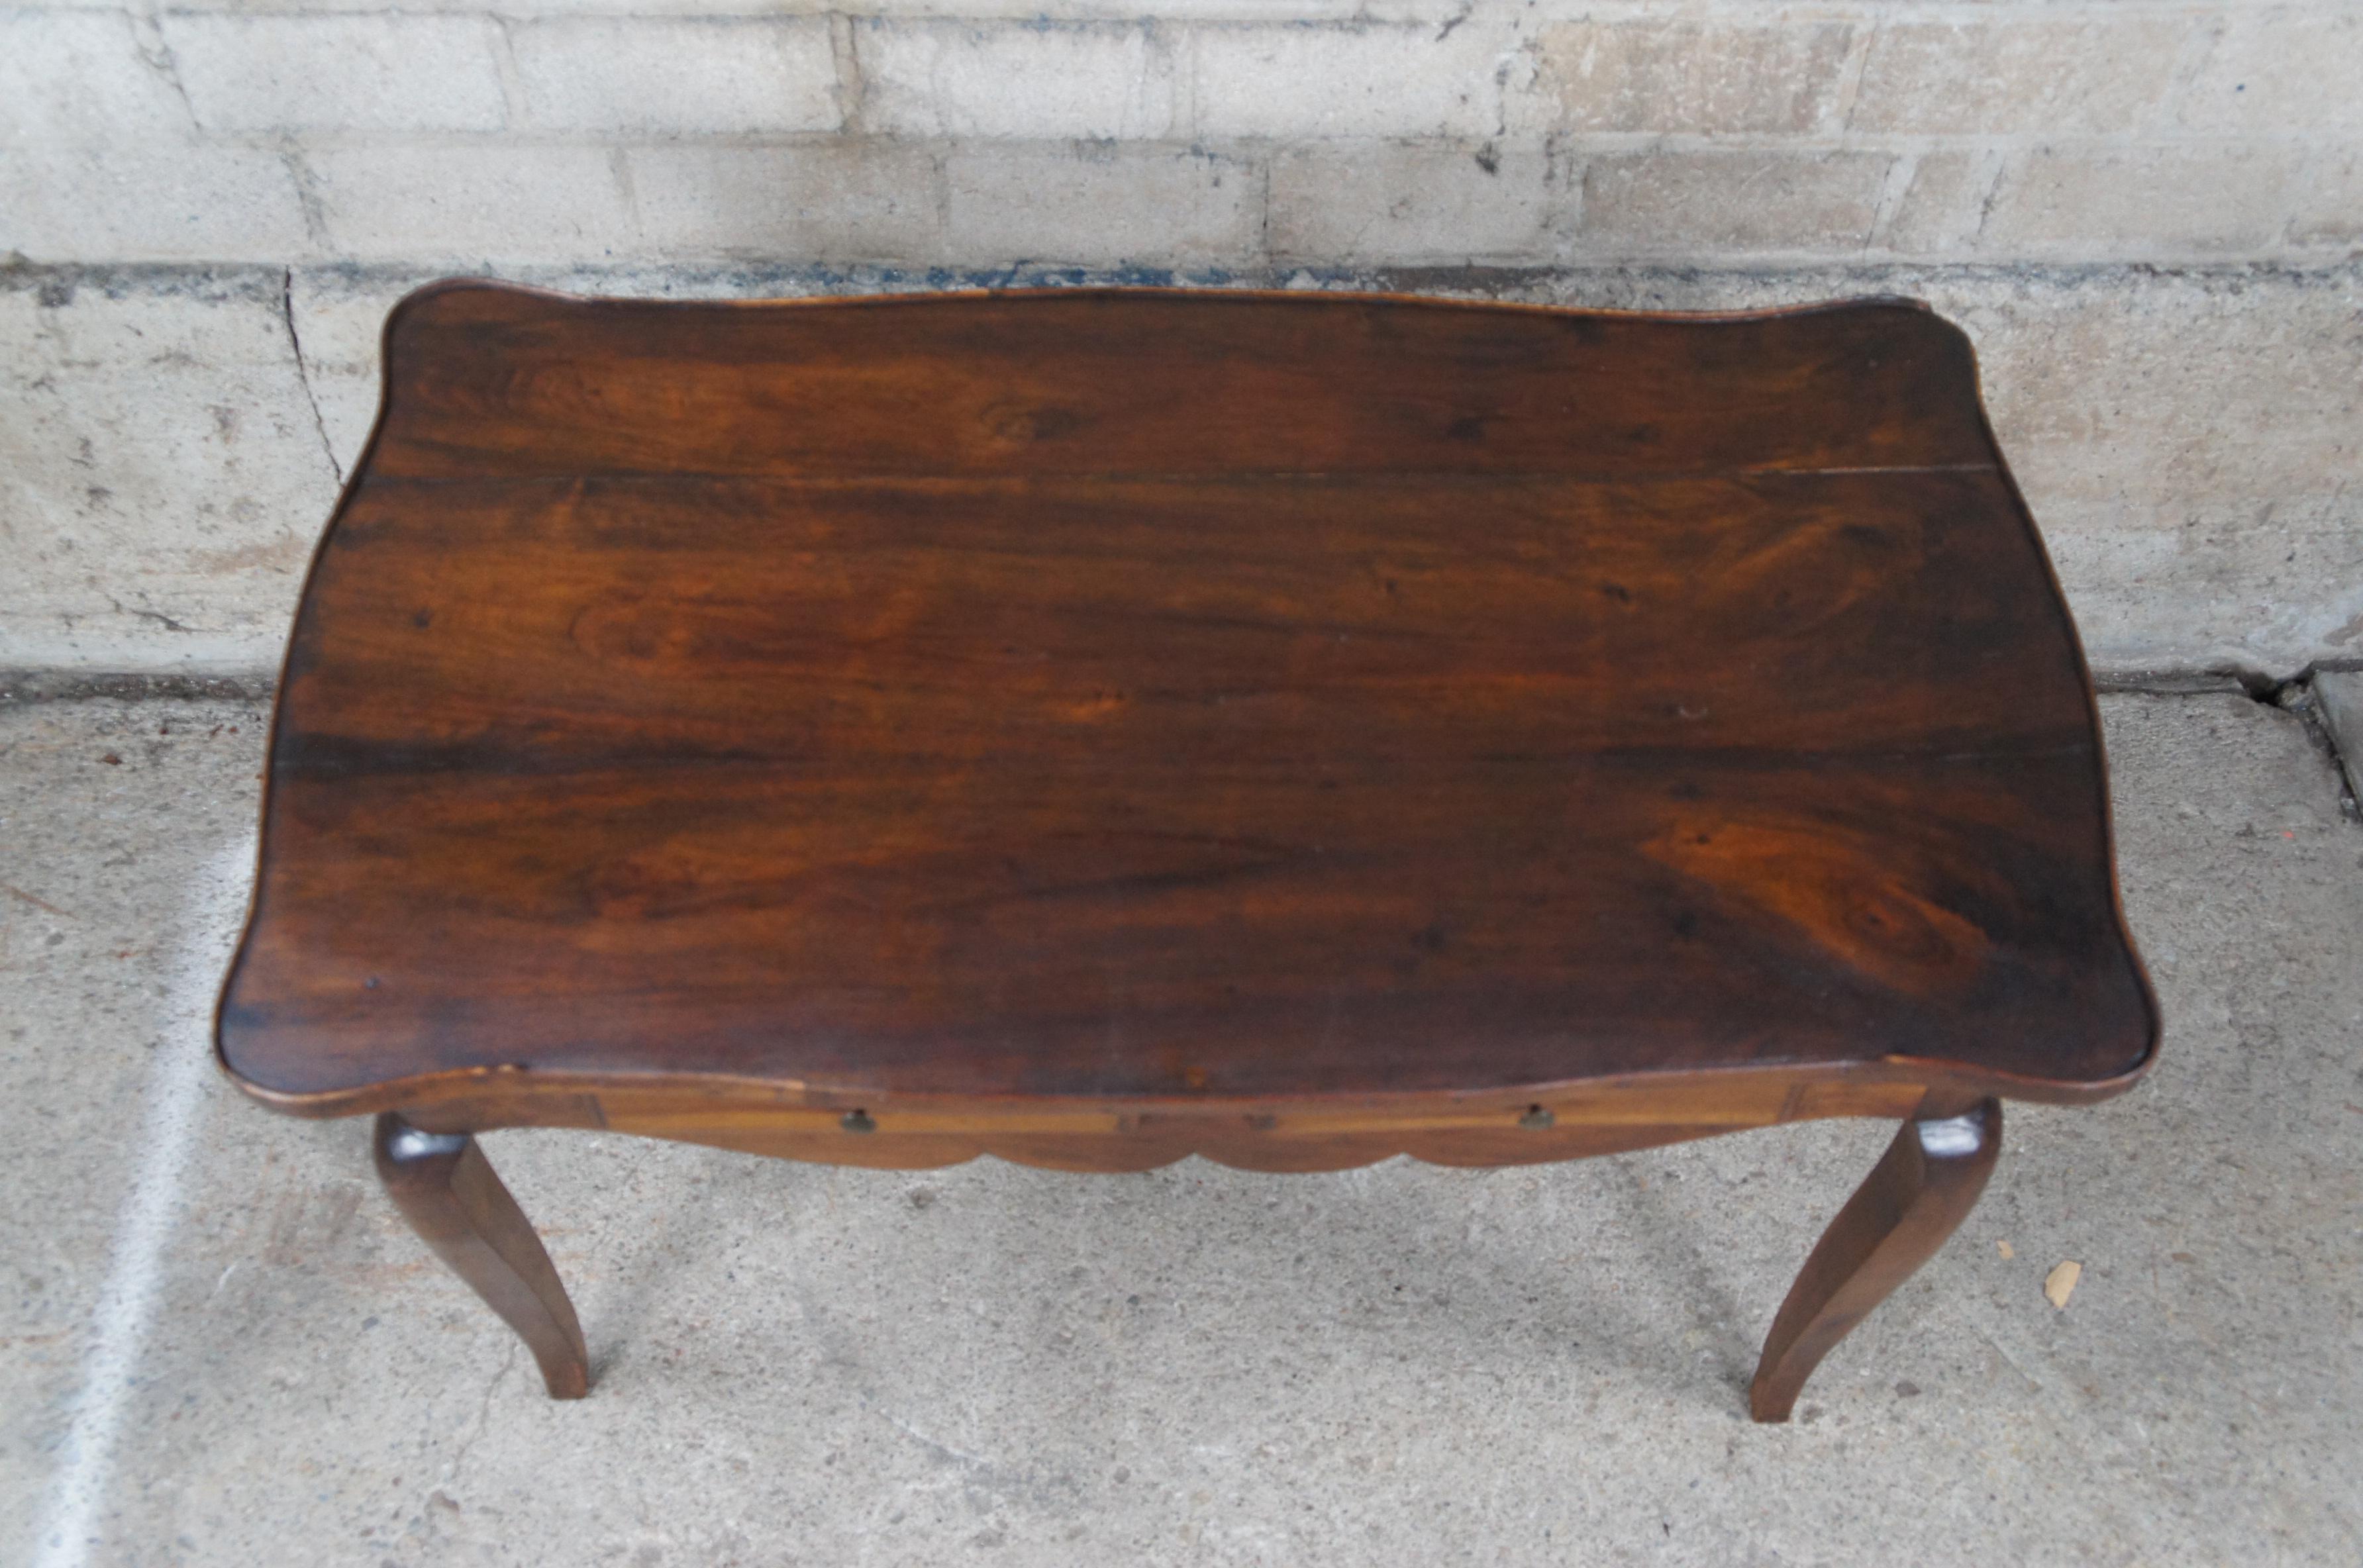 Antique 19th Century French Country Provincial Serpentine Walnut Coffee Table In Good Condition For Sale In Dayton, OH